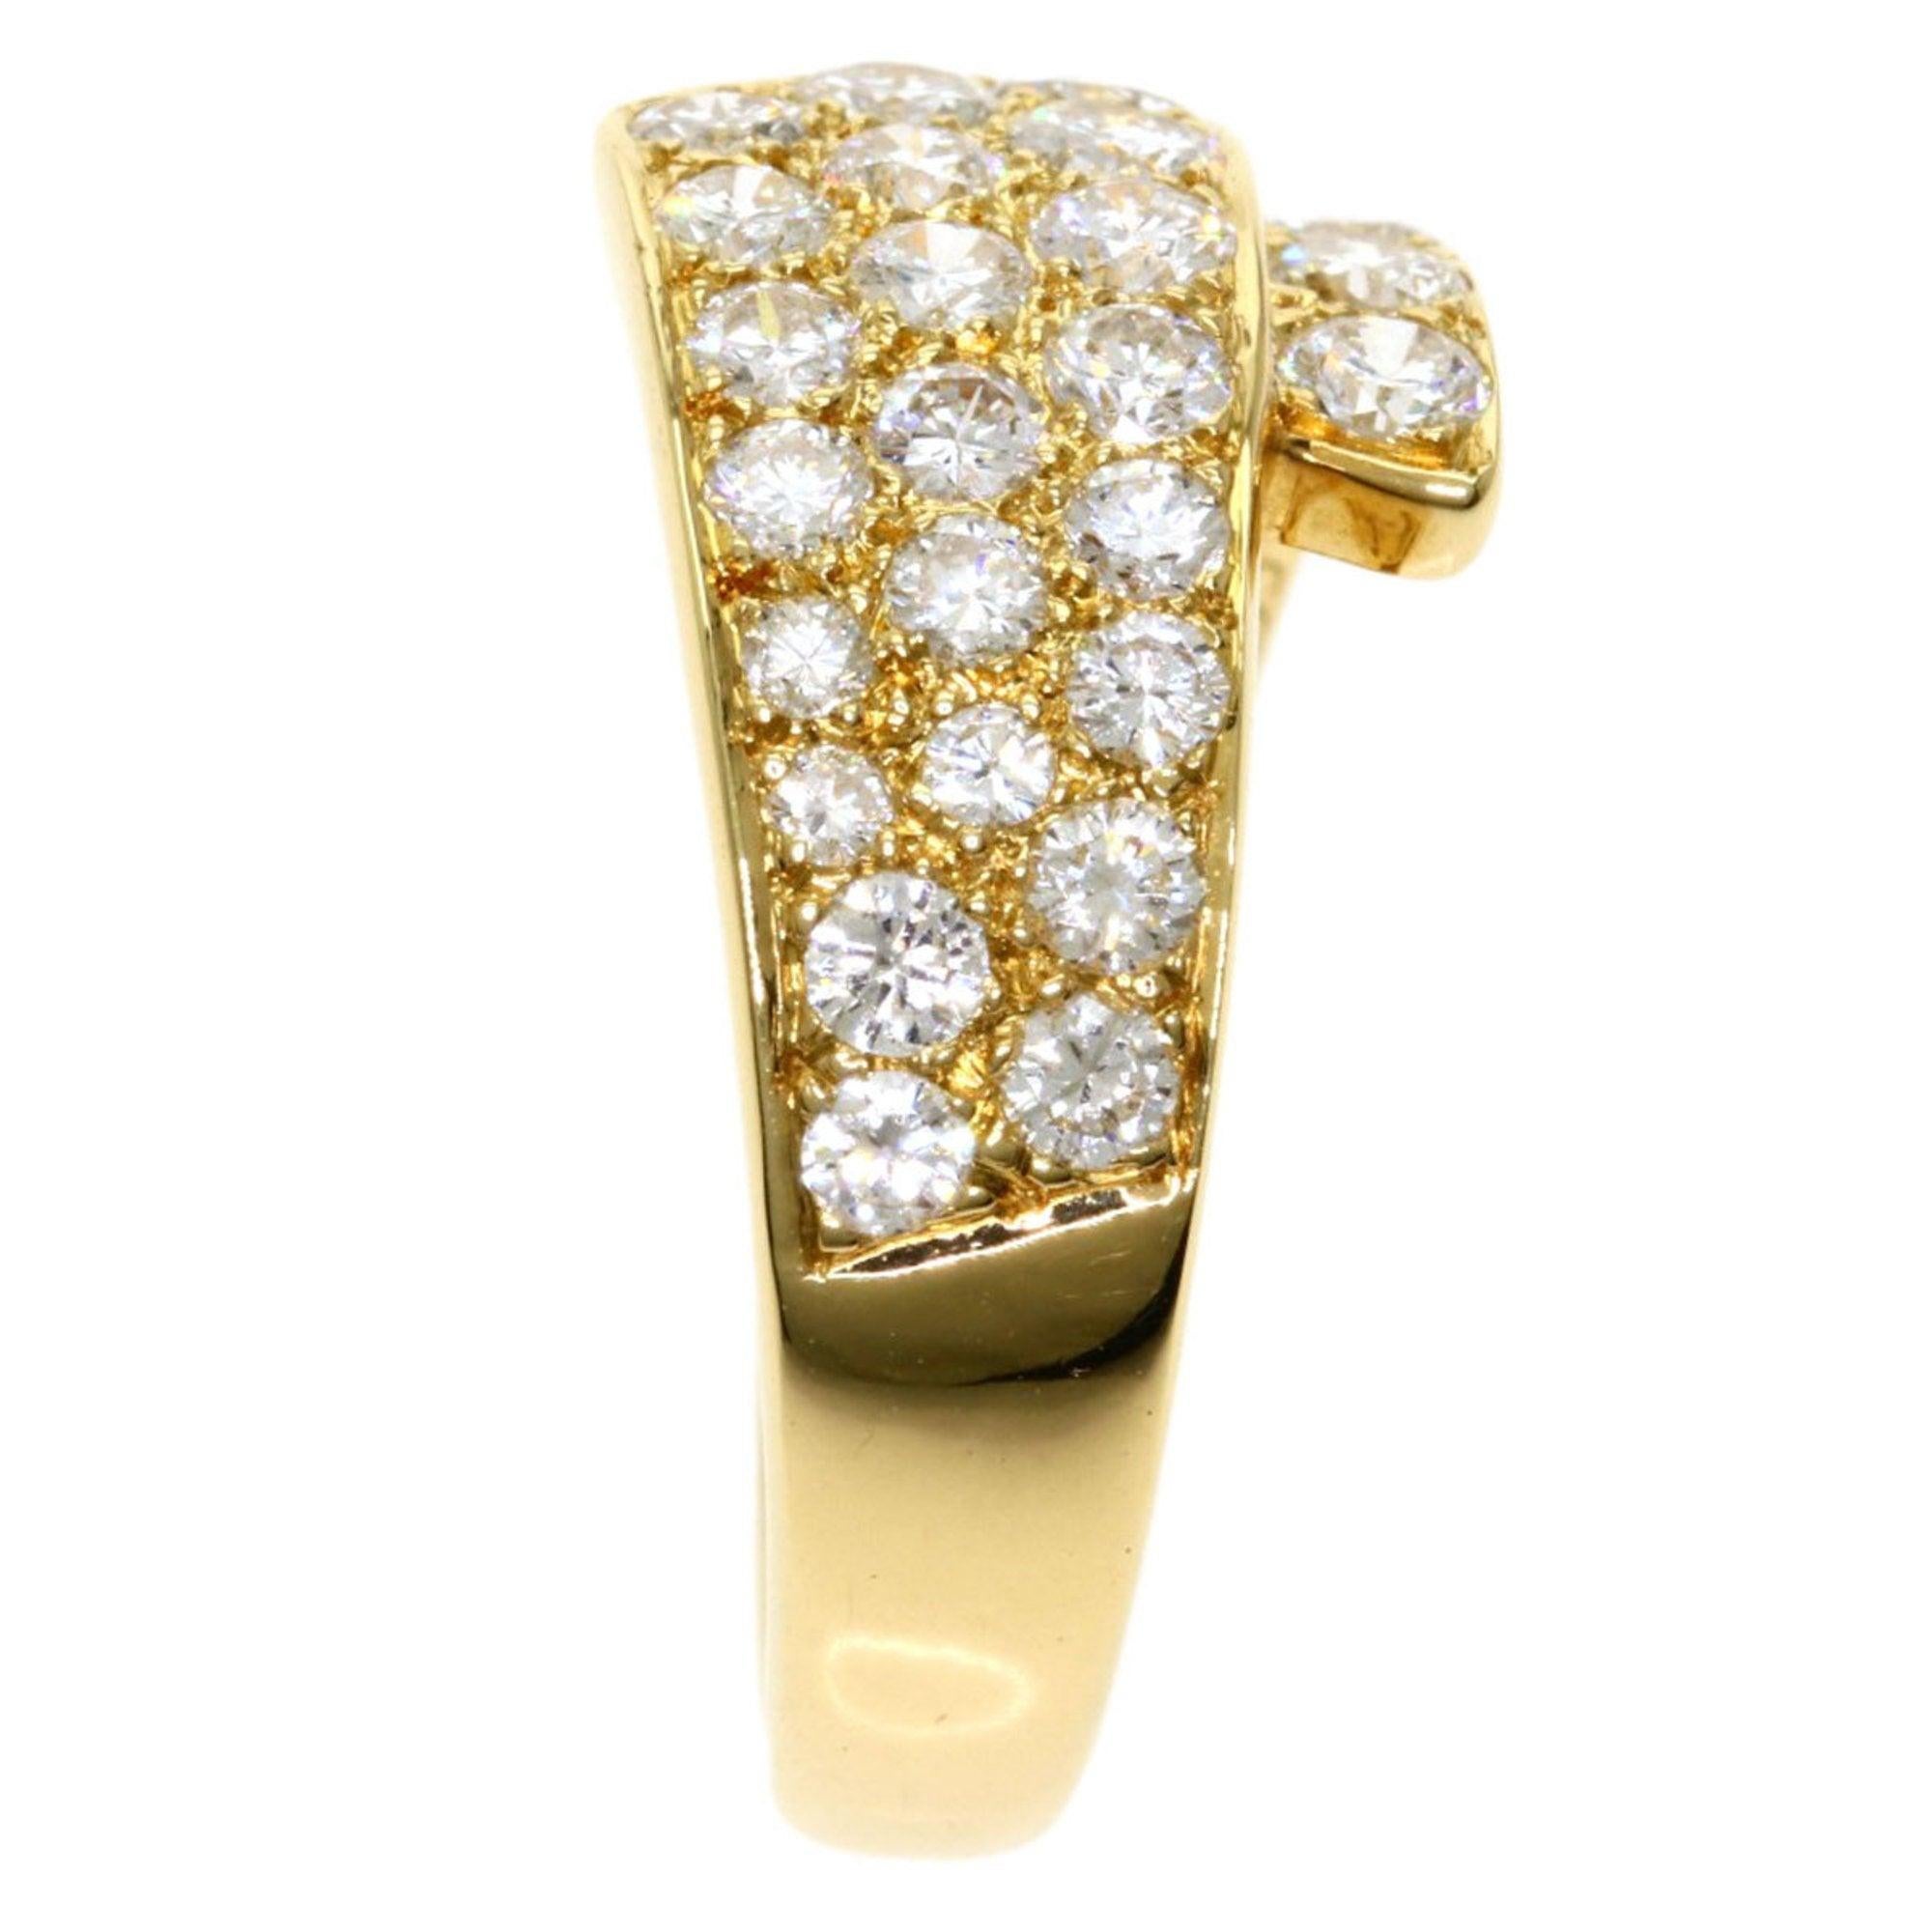 Van Cleef & Arpels Diamond Rings in 18K Yellow Gold In Good Condition For Sale In London, GB